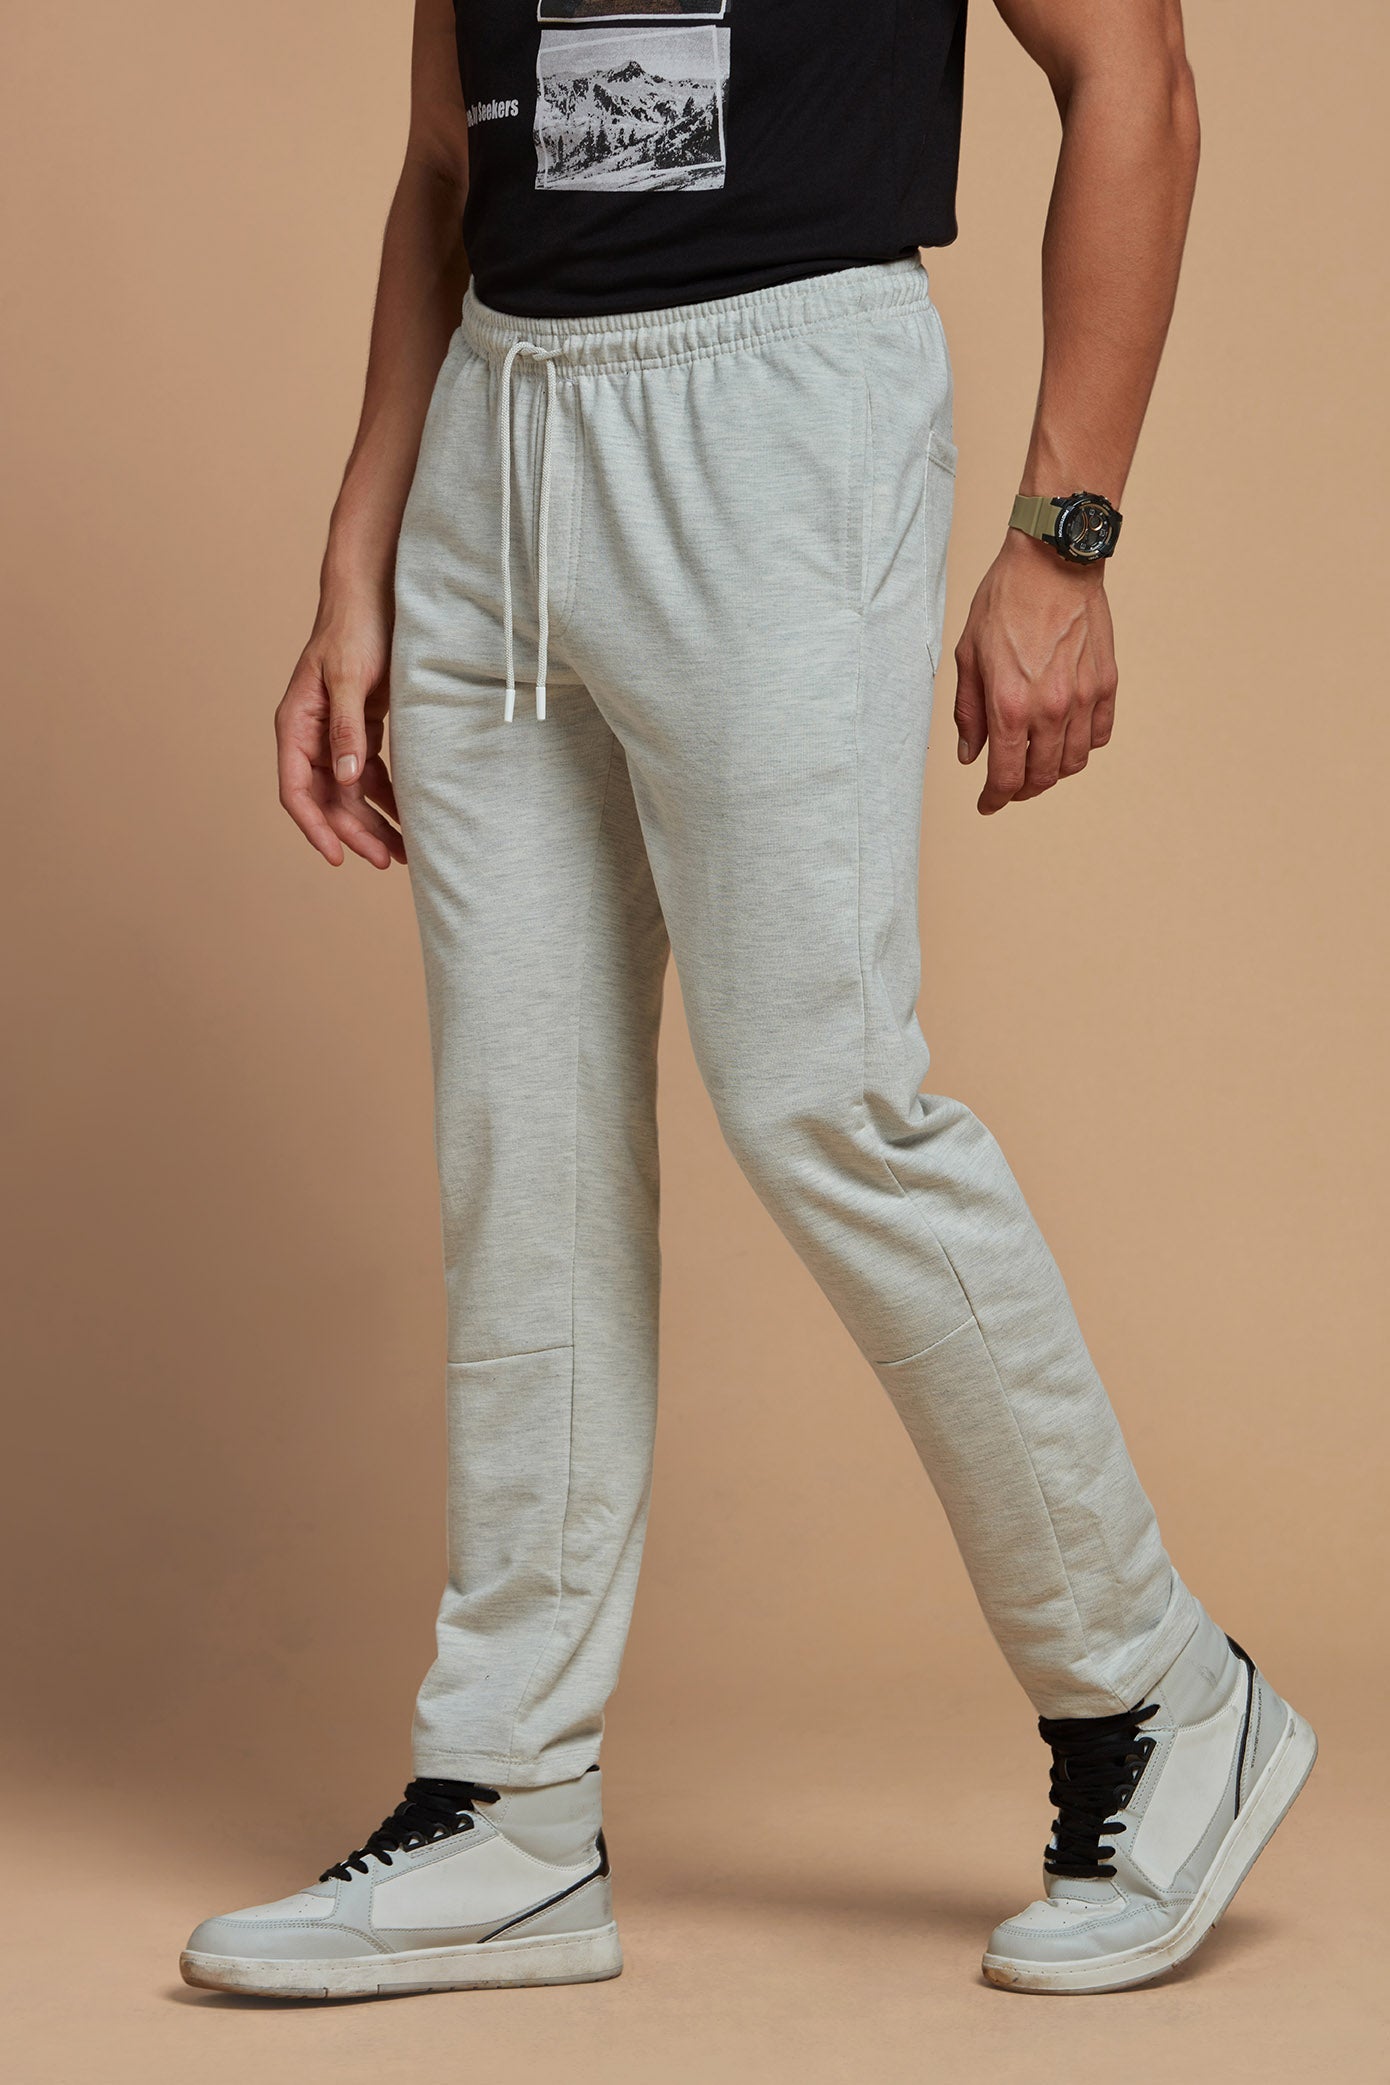 What Are Joggers, Sweatpants & Track Pants? Similarities & Differences |  Clovia Blog